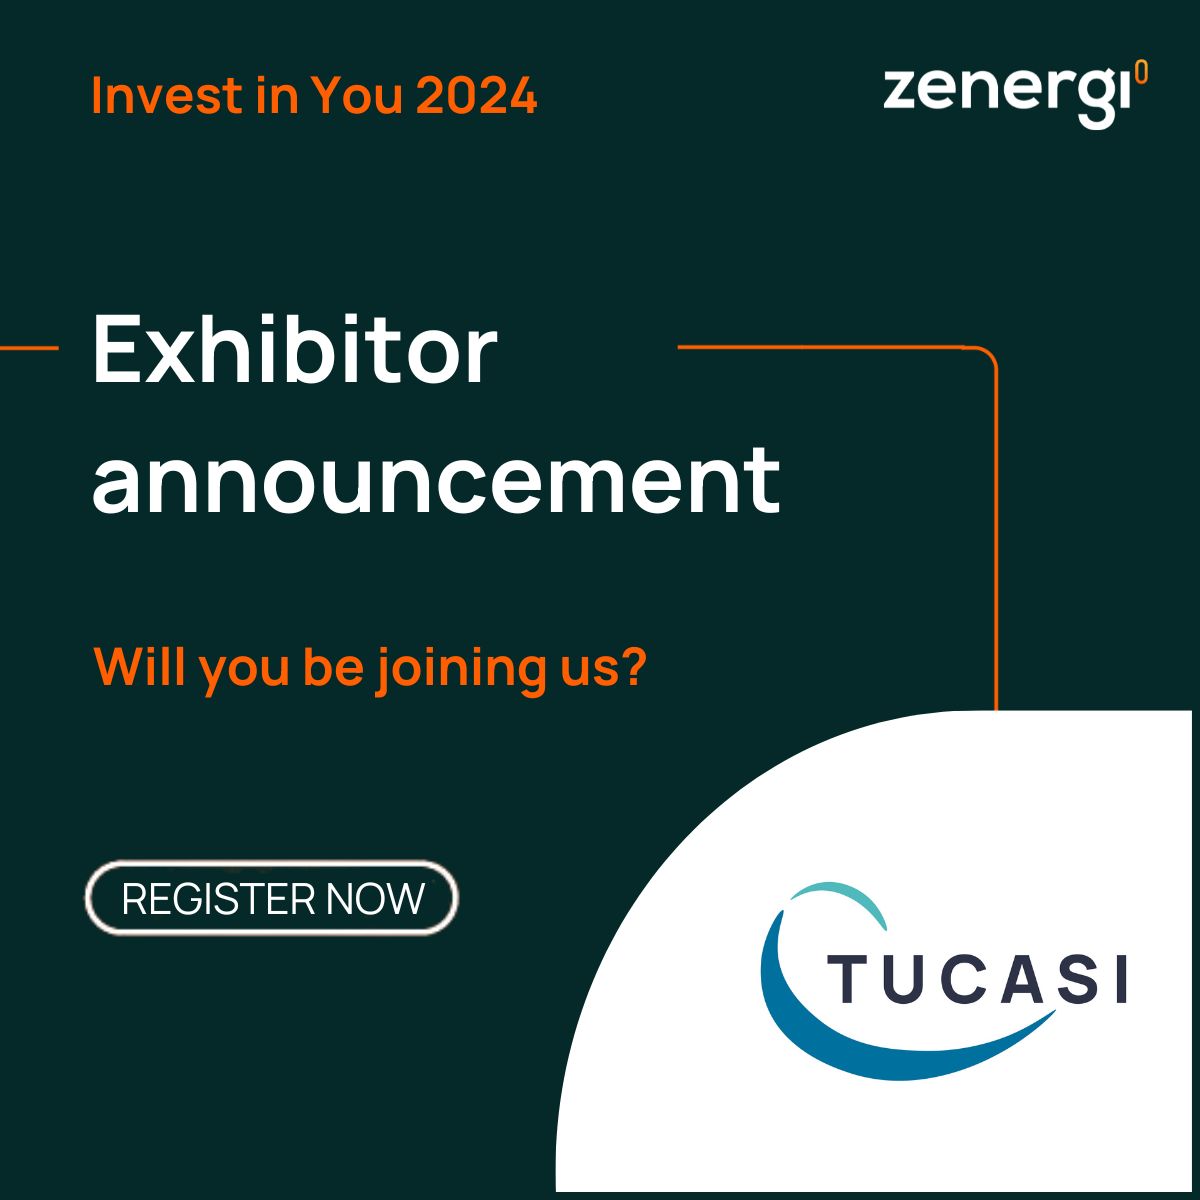 Invest in You 2024 exhibitor announcement: @Tucasi_ltd For over two decades, Tucasi has been providing administration and online payment systems to schools and Multi Academy Trusts. We can't wait to welcome them! 📅When: 08 May 📍Where: Hylands House: bit.ly/4aESsdH